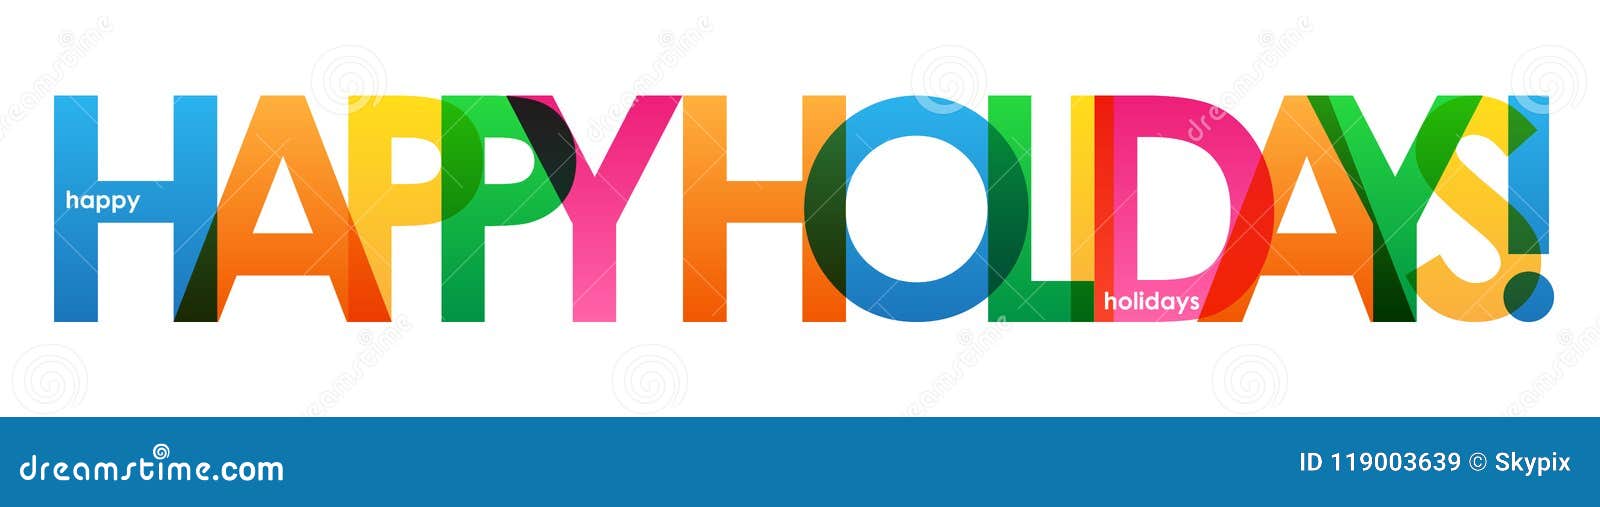 happy holidays! colorful overlapping letters  banner